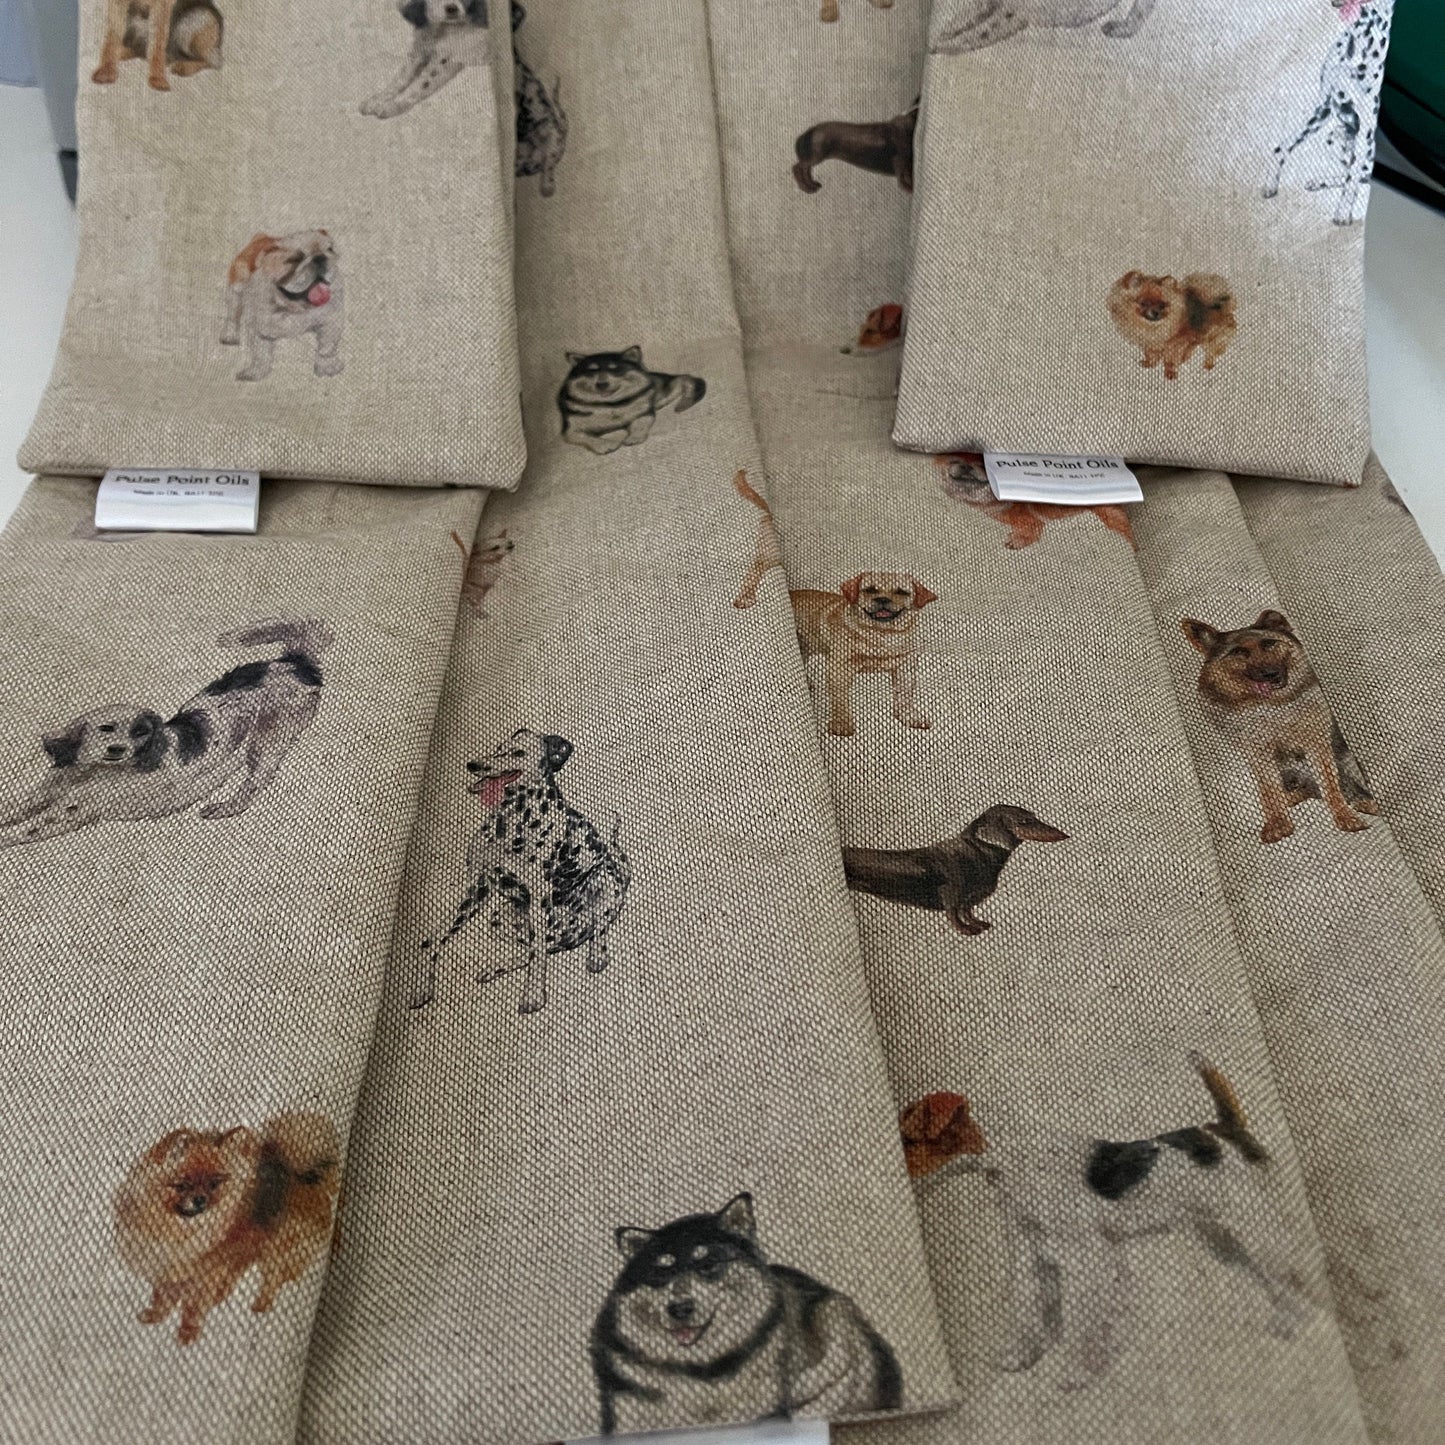 outer wrap for dog print for lavender scented wheat bags. Alsatian, Bulldog, Chihuahua, Labrador